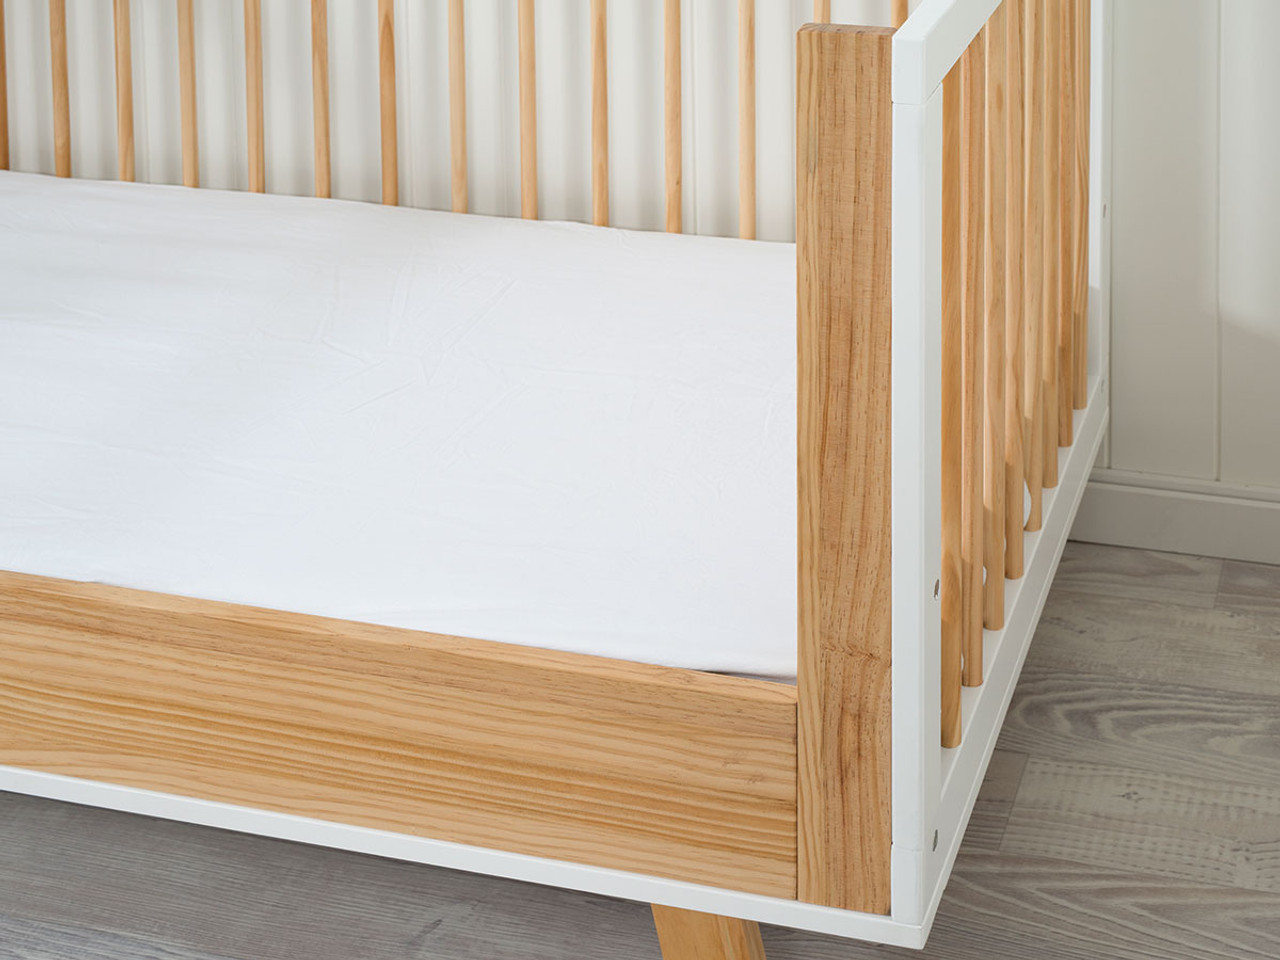 cot to bed conversion